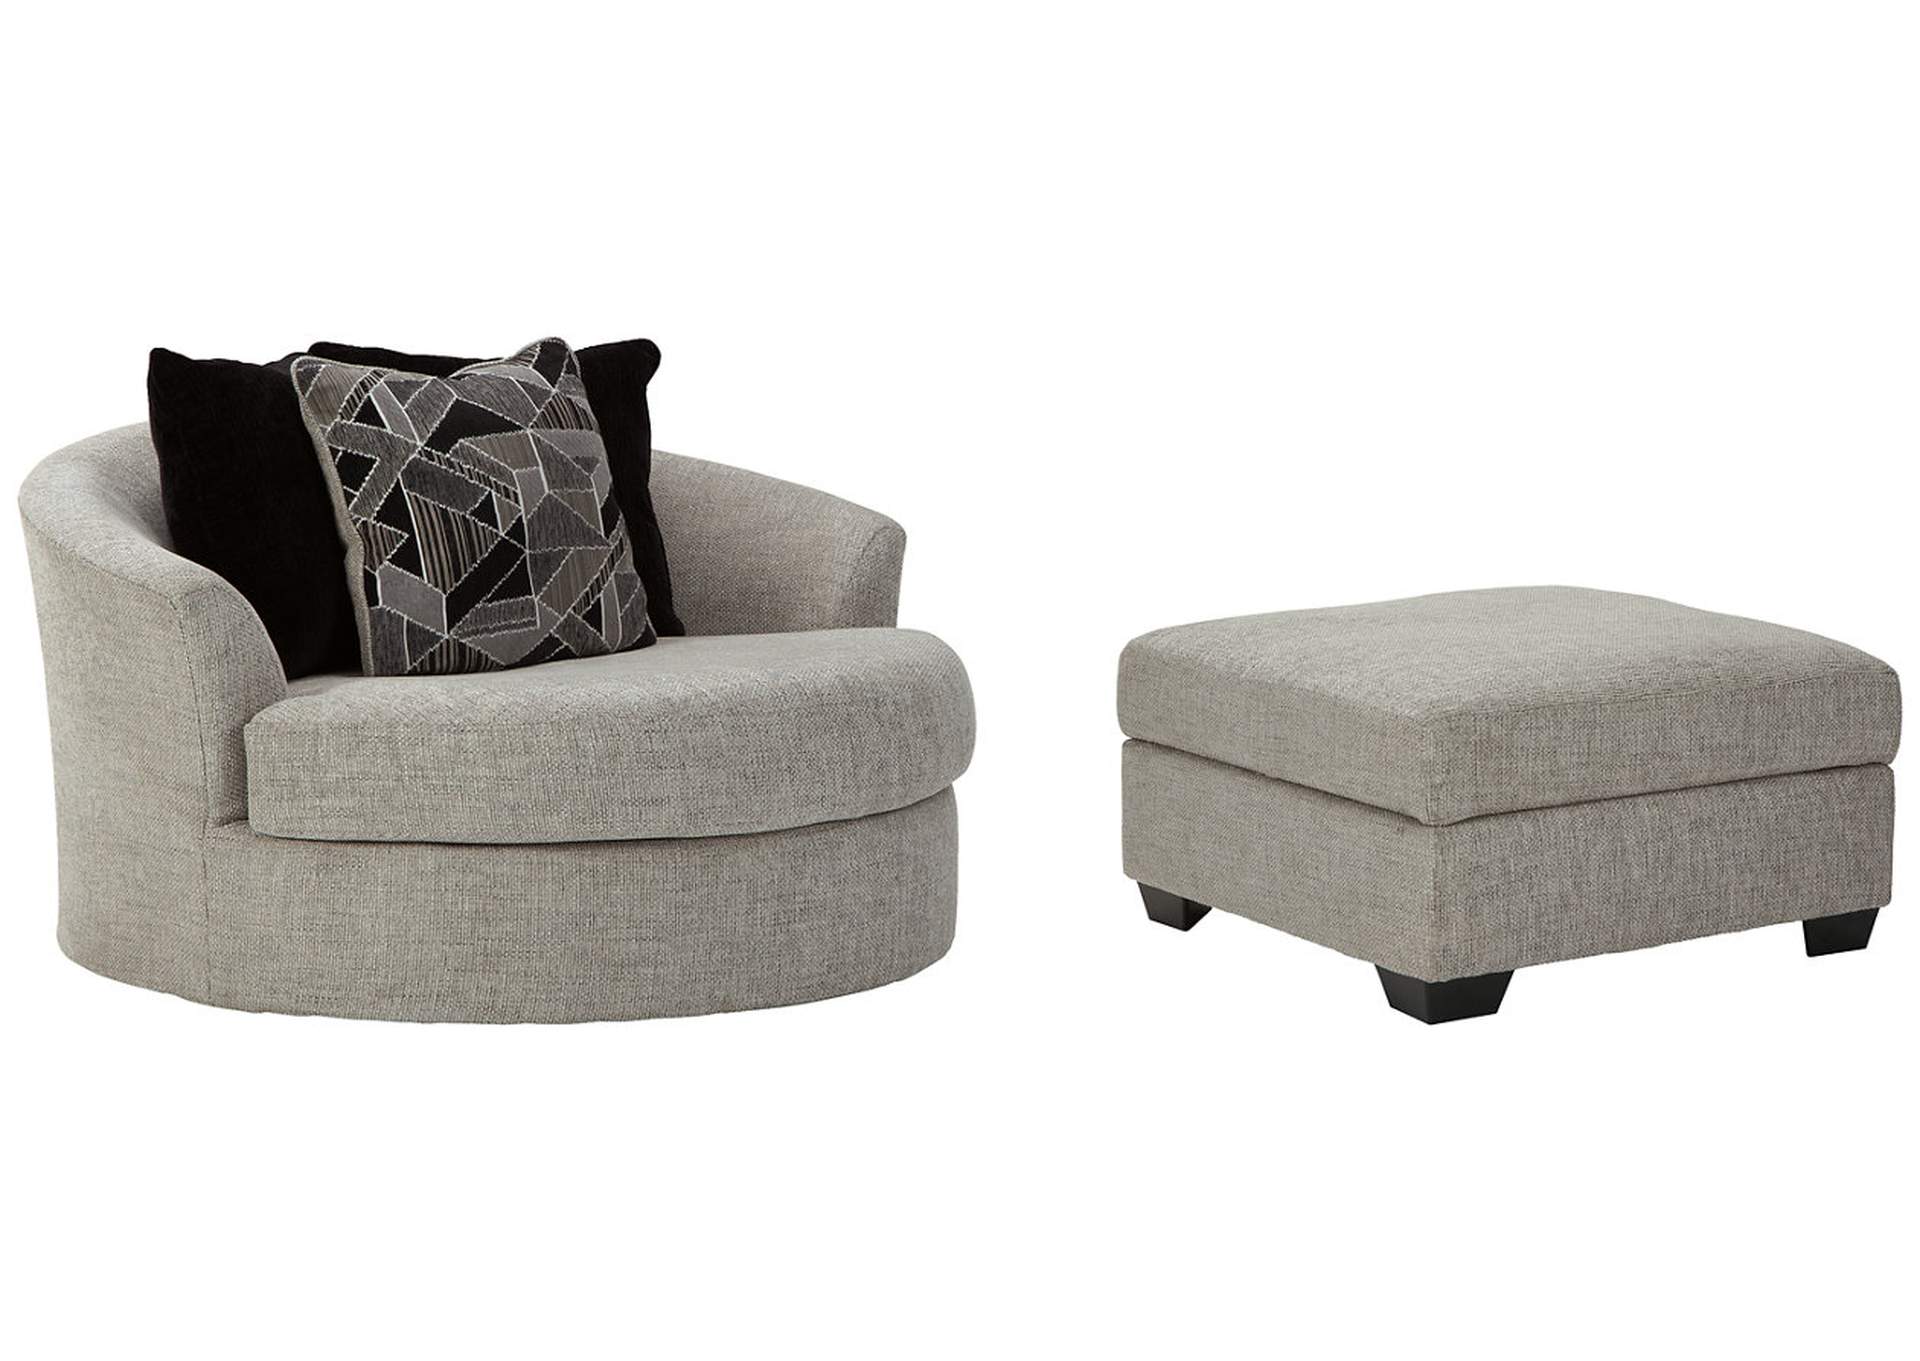 Megginson Oversized Chair and Ottoman